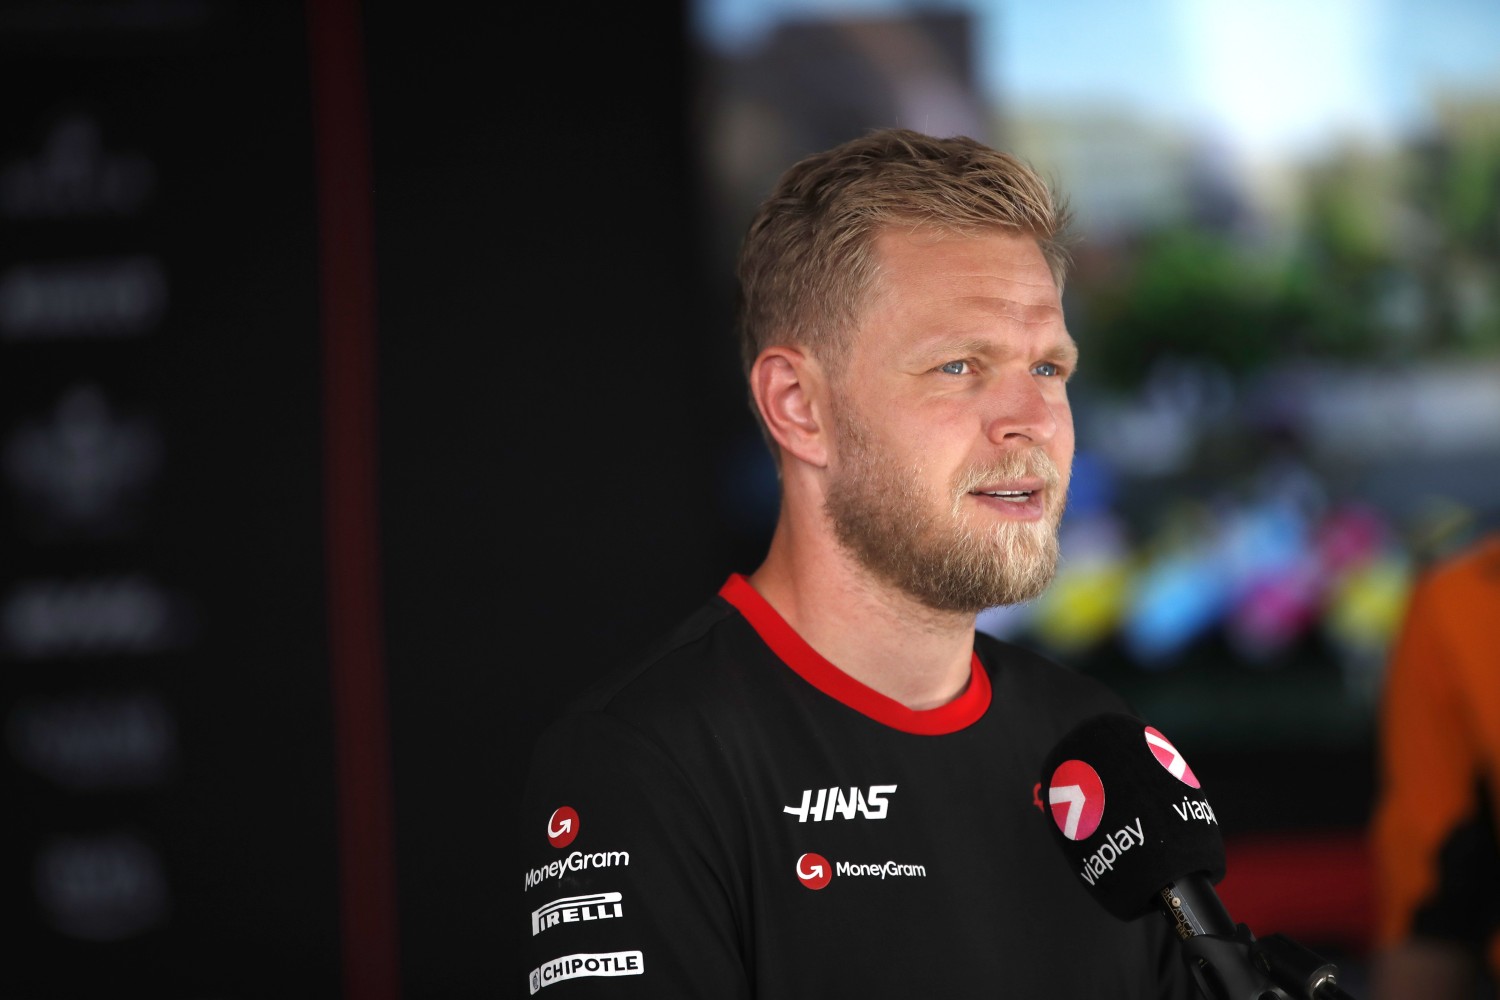 Kevin Magnussen, Haas F1 Team, talks to the press during the Mexico City GP at Autodromo Hermanos Rodriguez on Thursday October 26, 2023 in Mexico City, Mexico. (Photo by Zak Mauger / LAT Images)